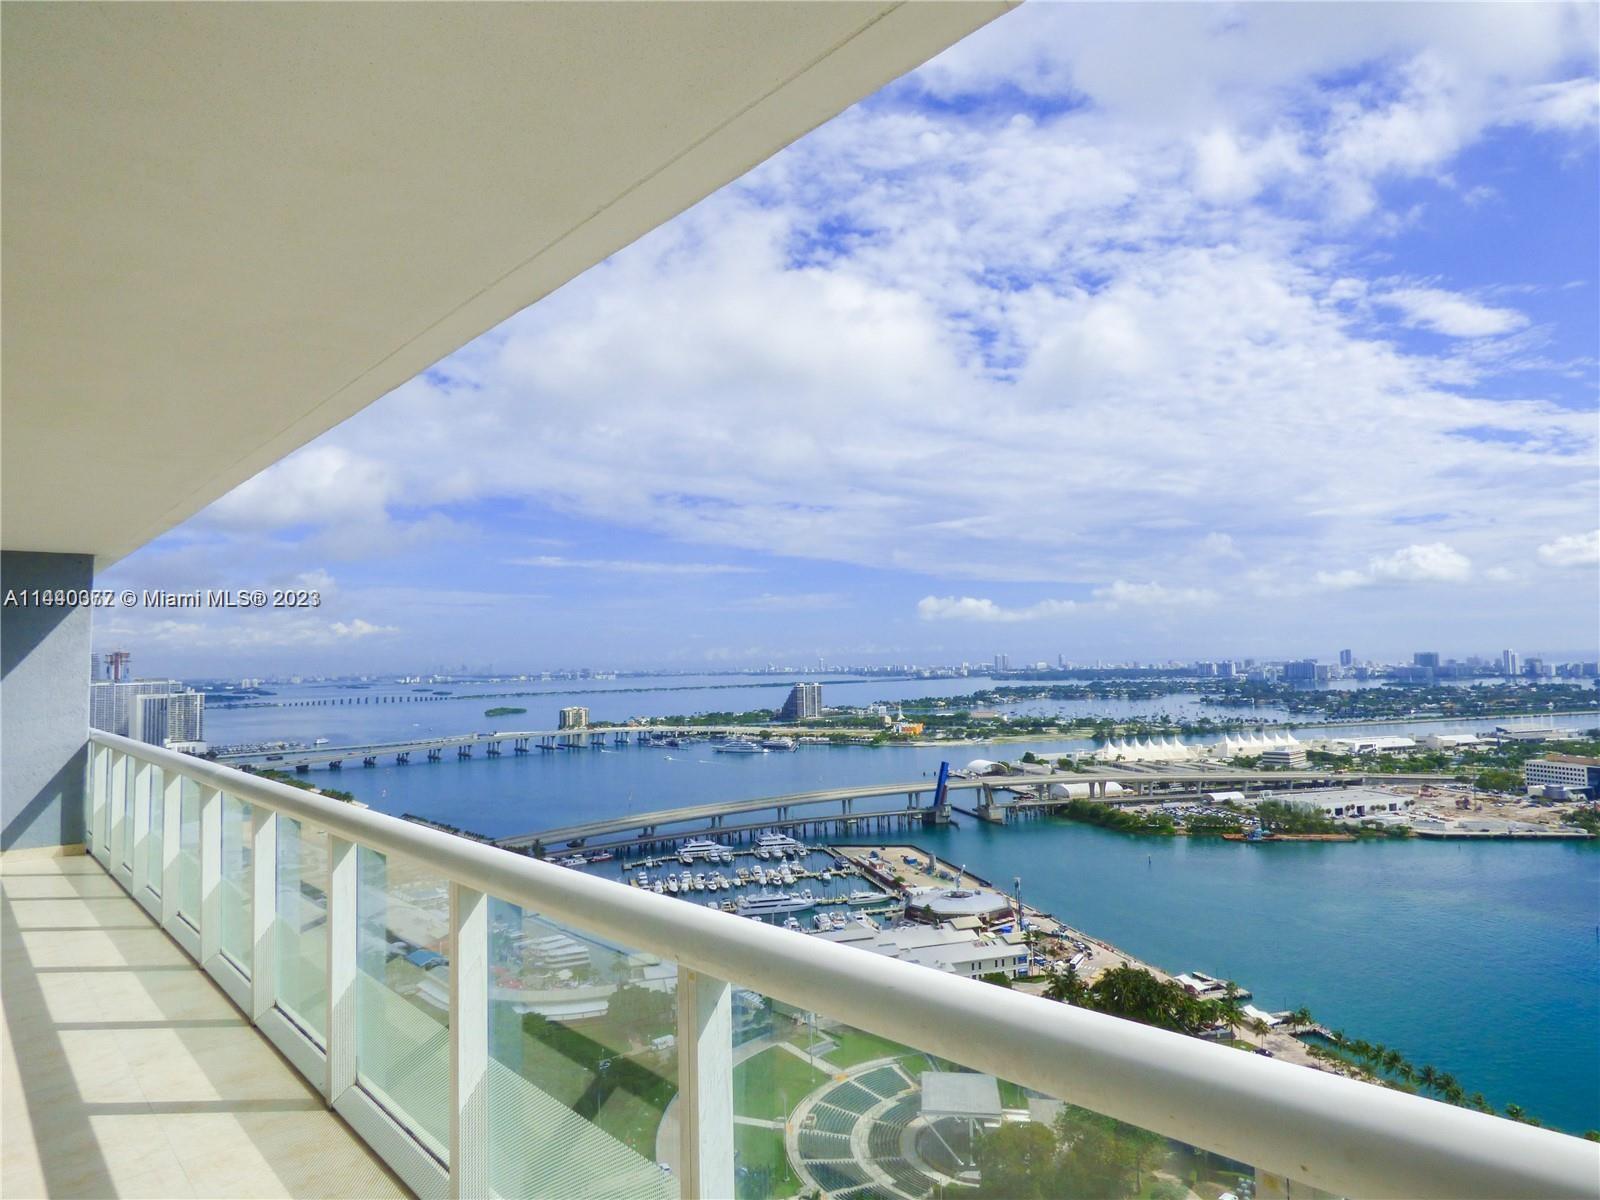 Gorgeous water and city views from every room overlooking Bayfront Park and complete wrap around balcony. Large and spacious bedrooms with black out shades and en-suite bathrooms as well as custom closets. The master bedroom has his/hers closet as well as a jacuzzi bathtub. Kitchen comes equipped with Bosch appliances and custom backsplash. Large capacity washer/dryer. Magnificent 3 story lobby, Building amenities include 24 hour Concierge, security services, and Valet parking. With infinity Pool Cabanas, snack bar, and Gym. Located just minutes from Brickell, Midtown, South Beach and Airport.